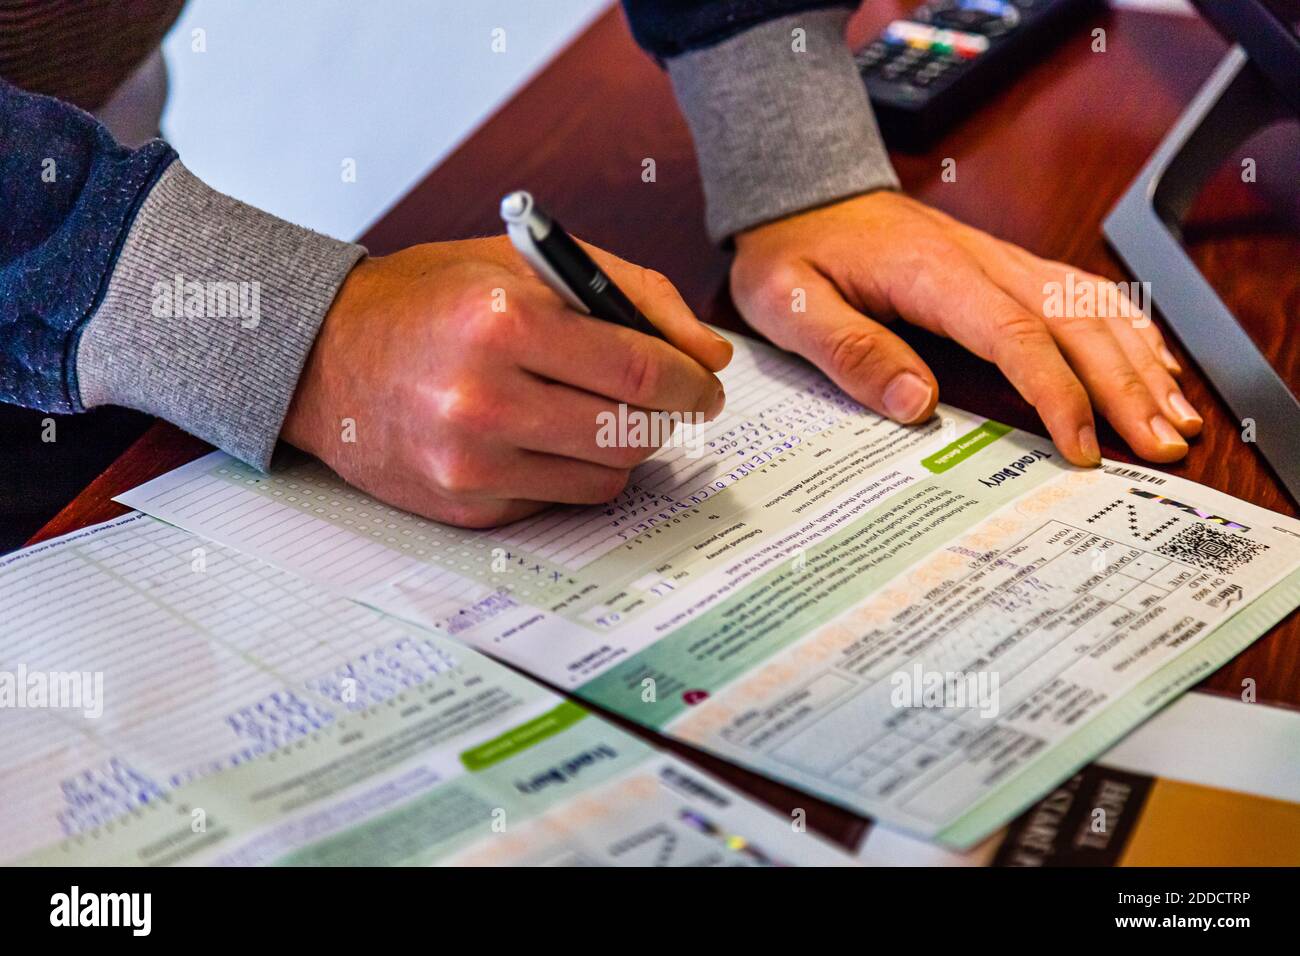 Before starting the Eurorail journey, all travel details must be entered in the travel diary, because this is the only way to validate the Interrail pass as a ticket Stock Photo